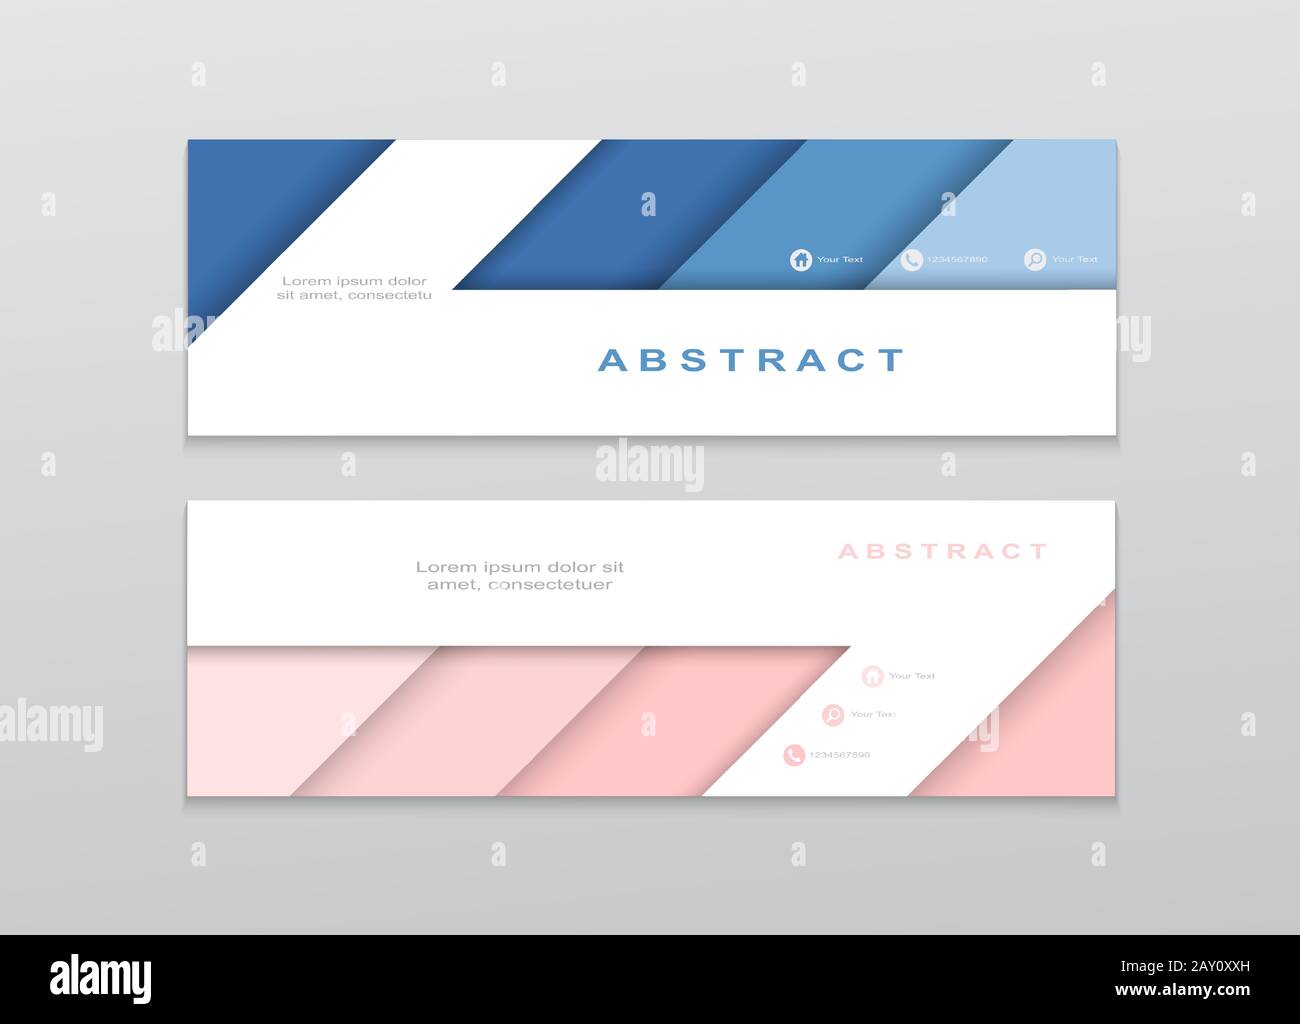 3d vector abstract banner template. Horizontal web banner, modern dynamic design. Creative design of papercut style blue-pink colored banners on gray Stock Vector